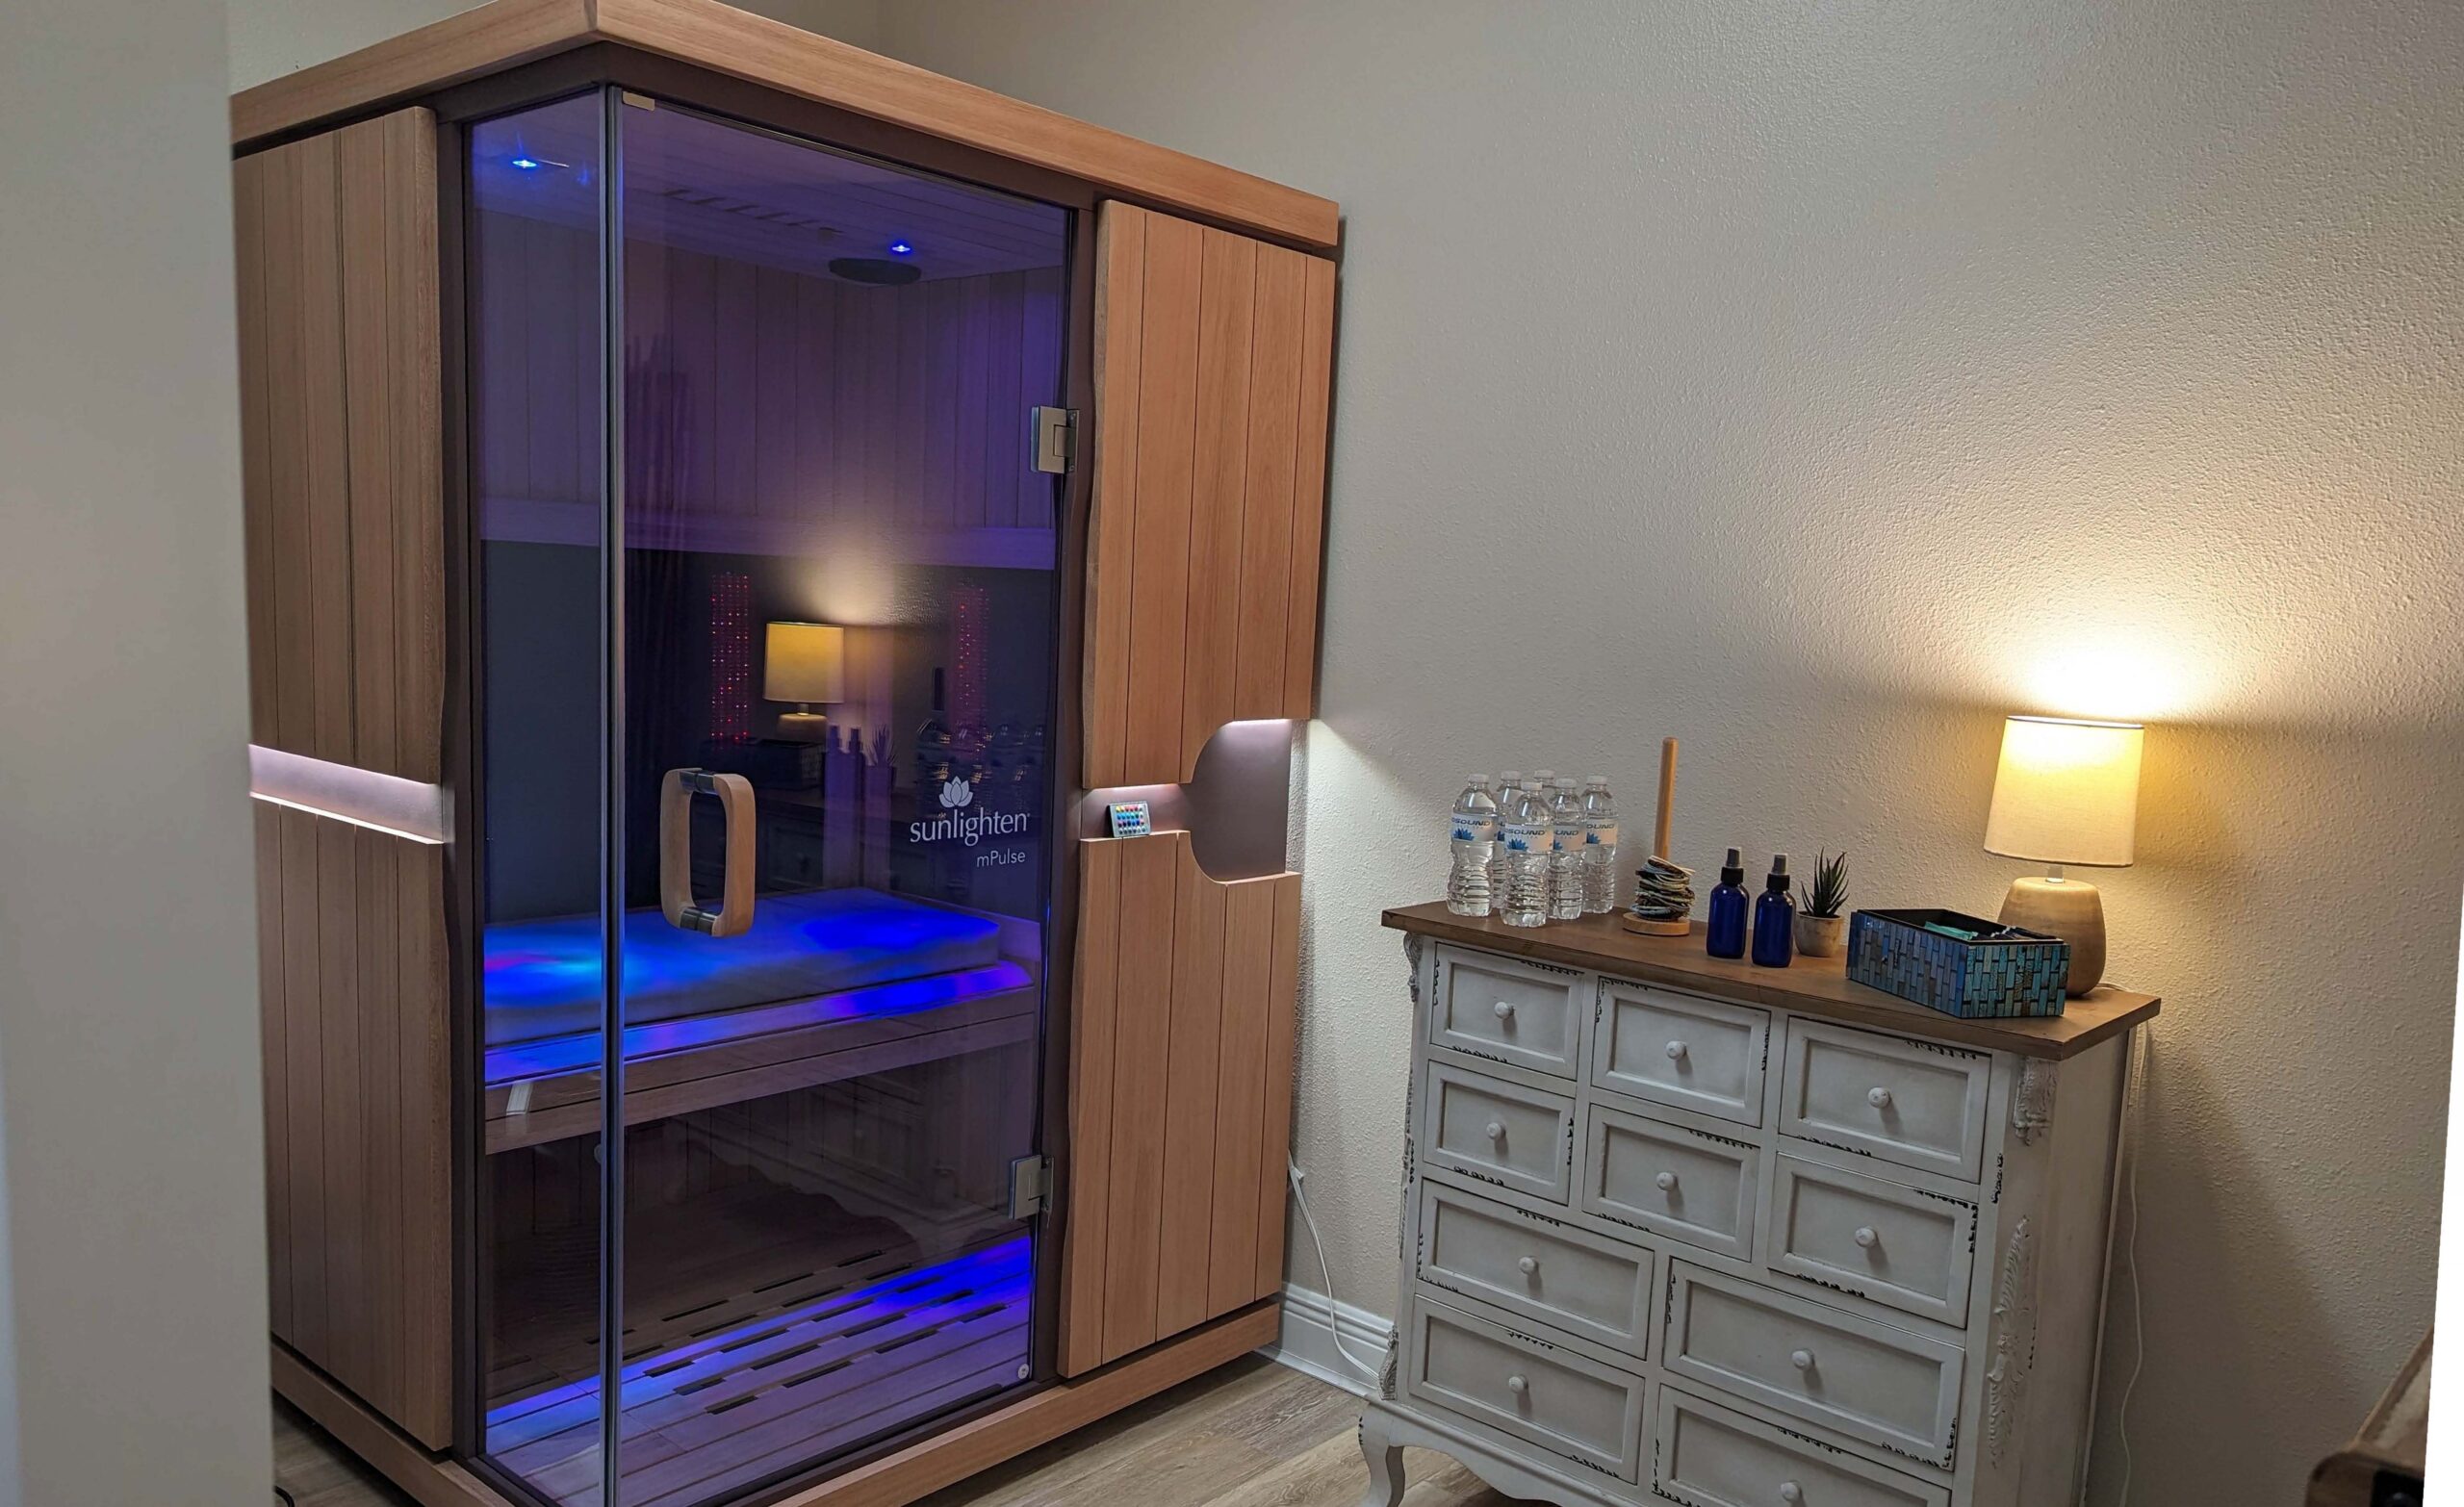 Introducing the new MPulse 3-in-1 Infrared Sauna!